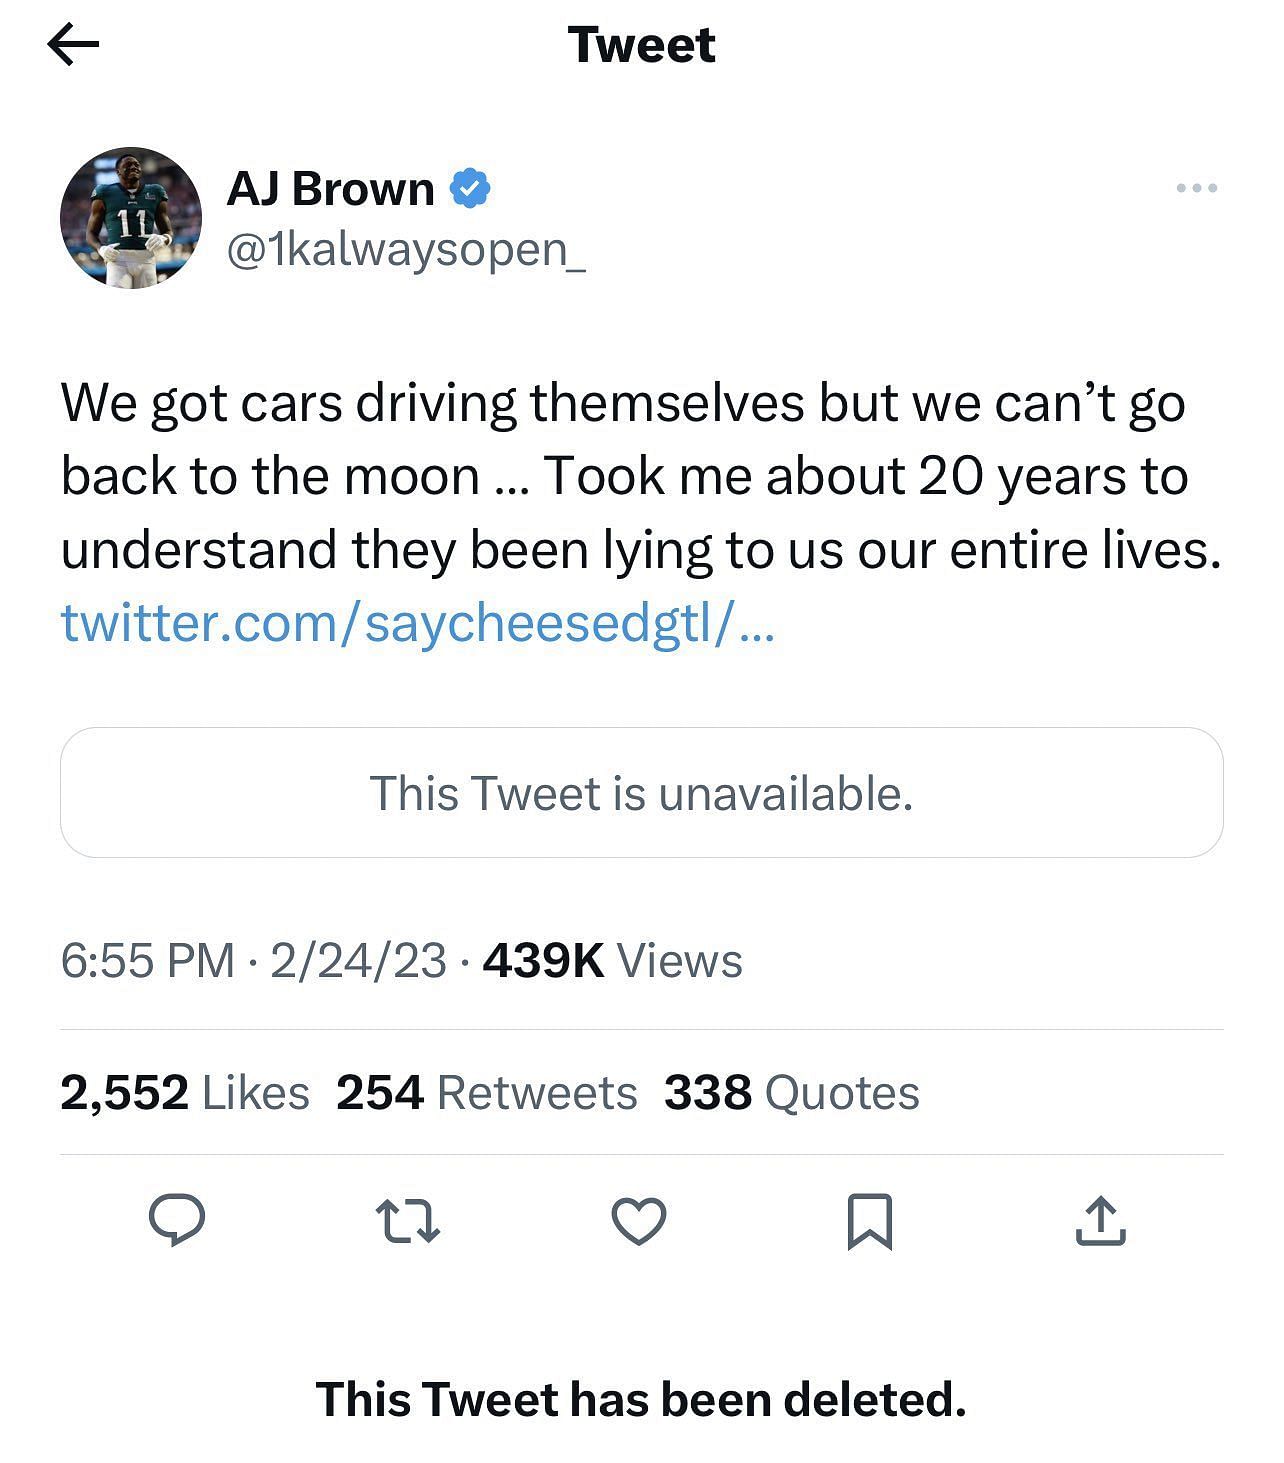 Philadelphia Eagles wide receiver AJ Brown claiming that man never landed on the moon